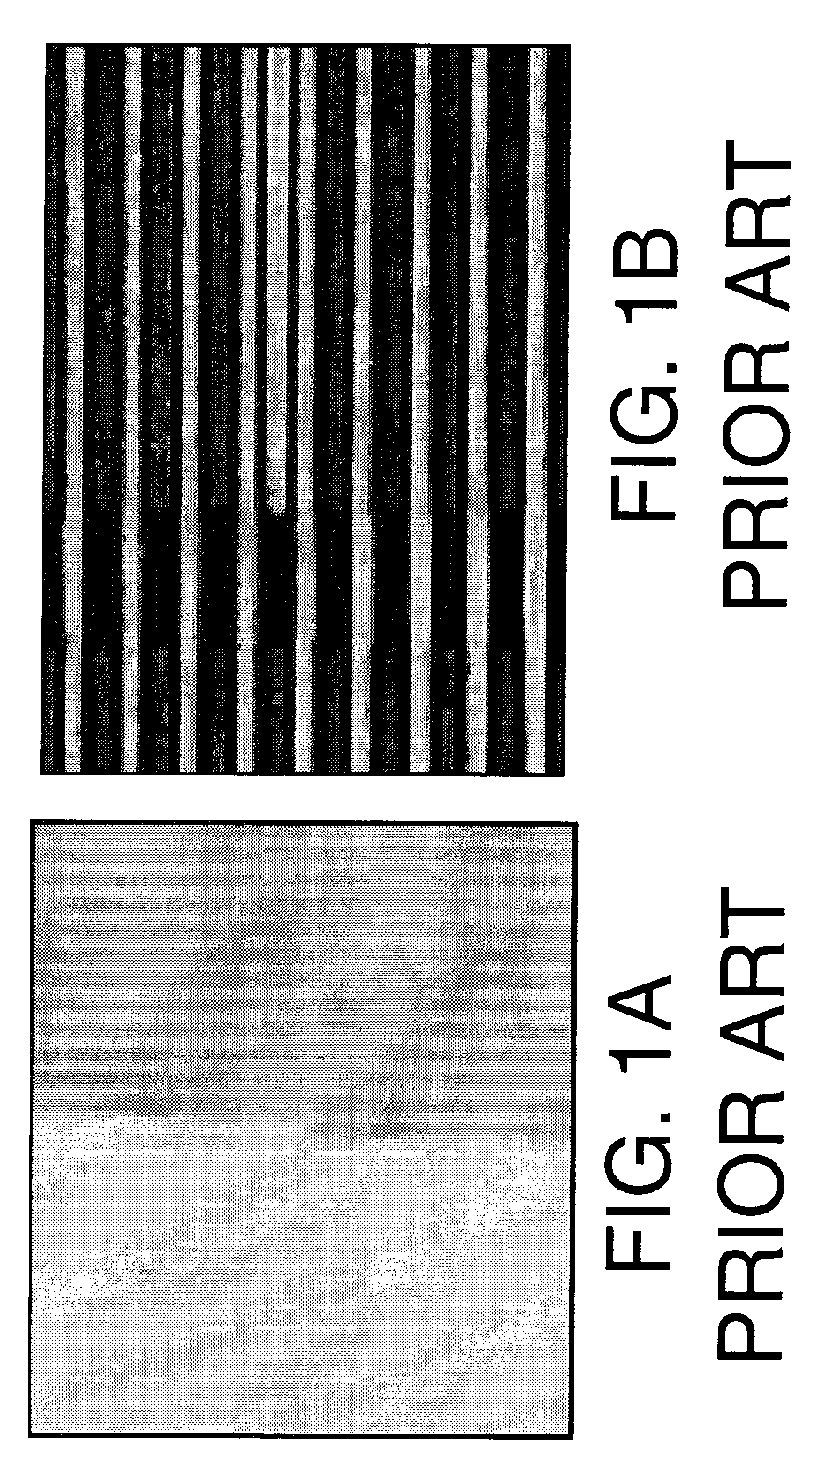 Grounding front-end-of-line structures on a SOI substrate